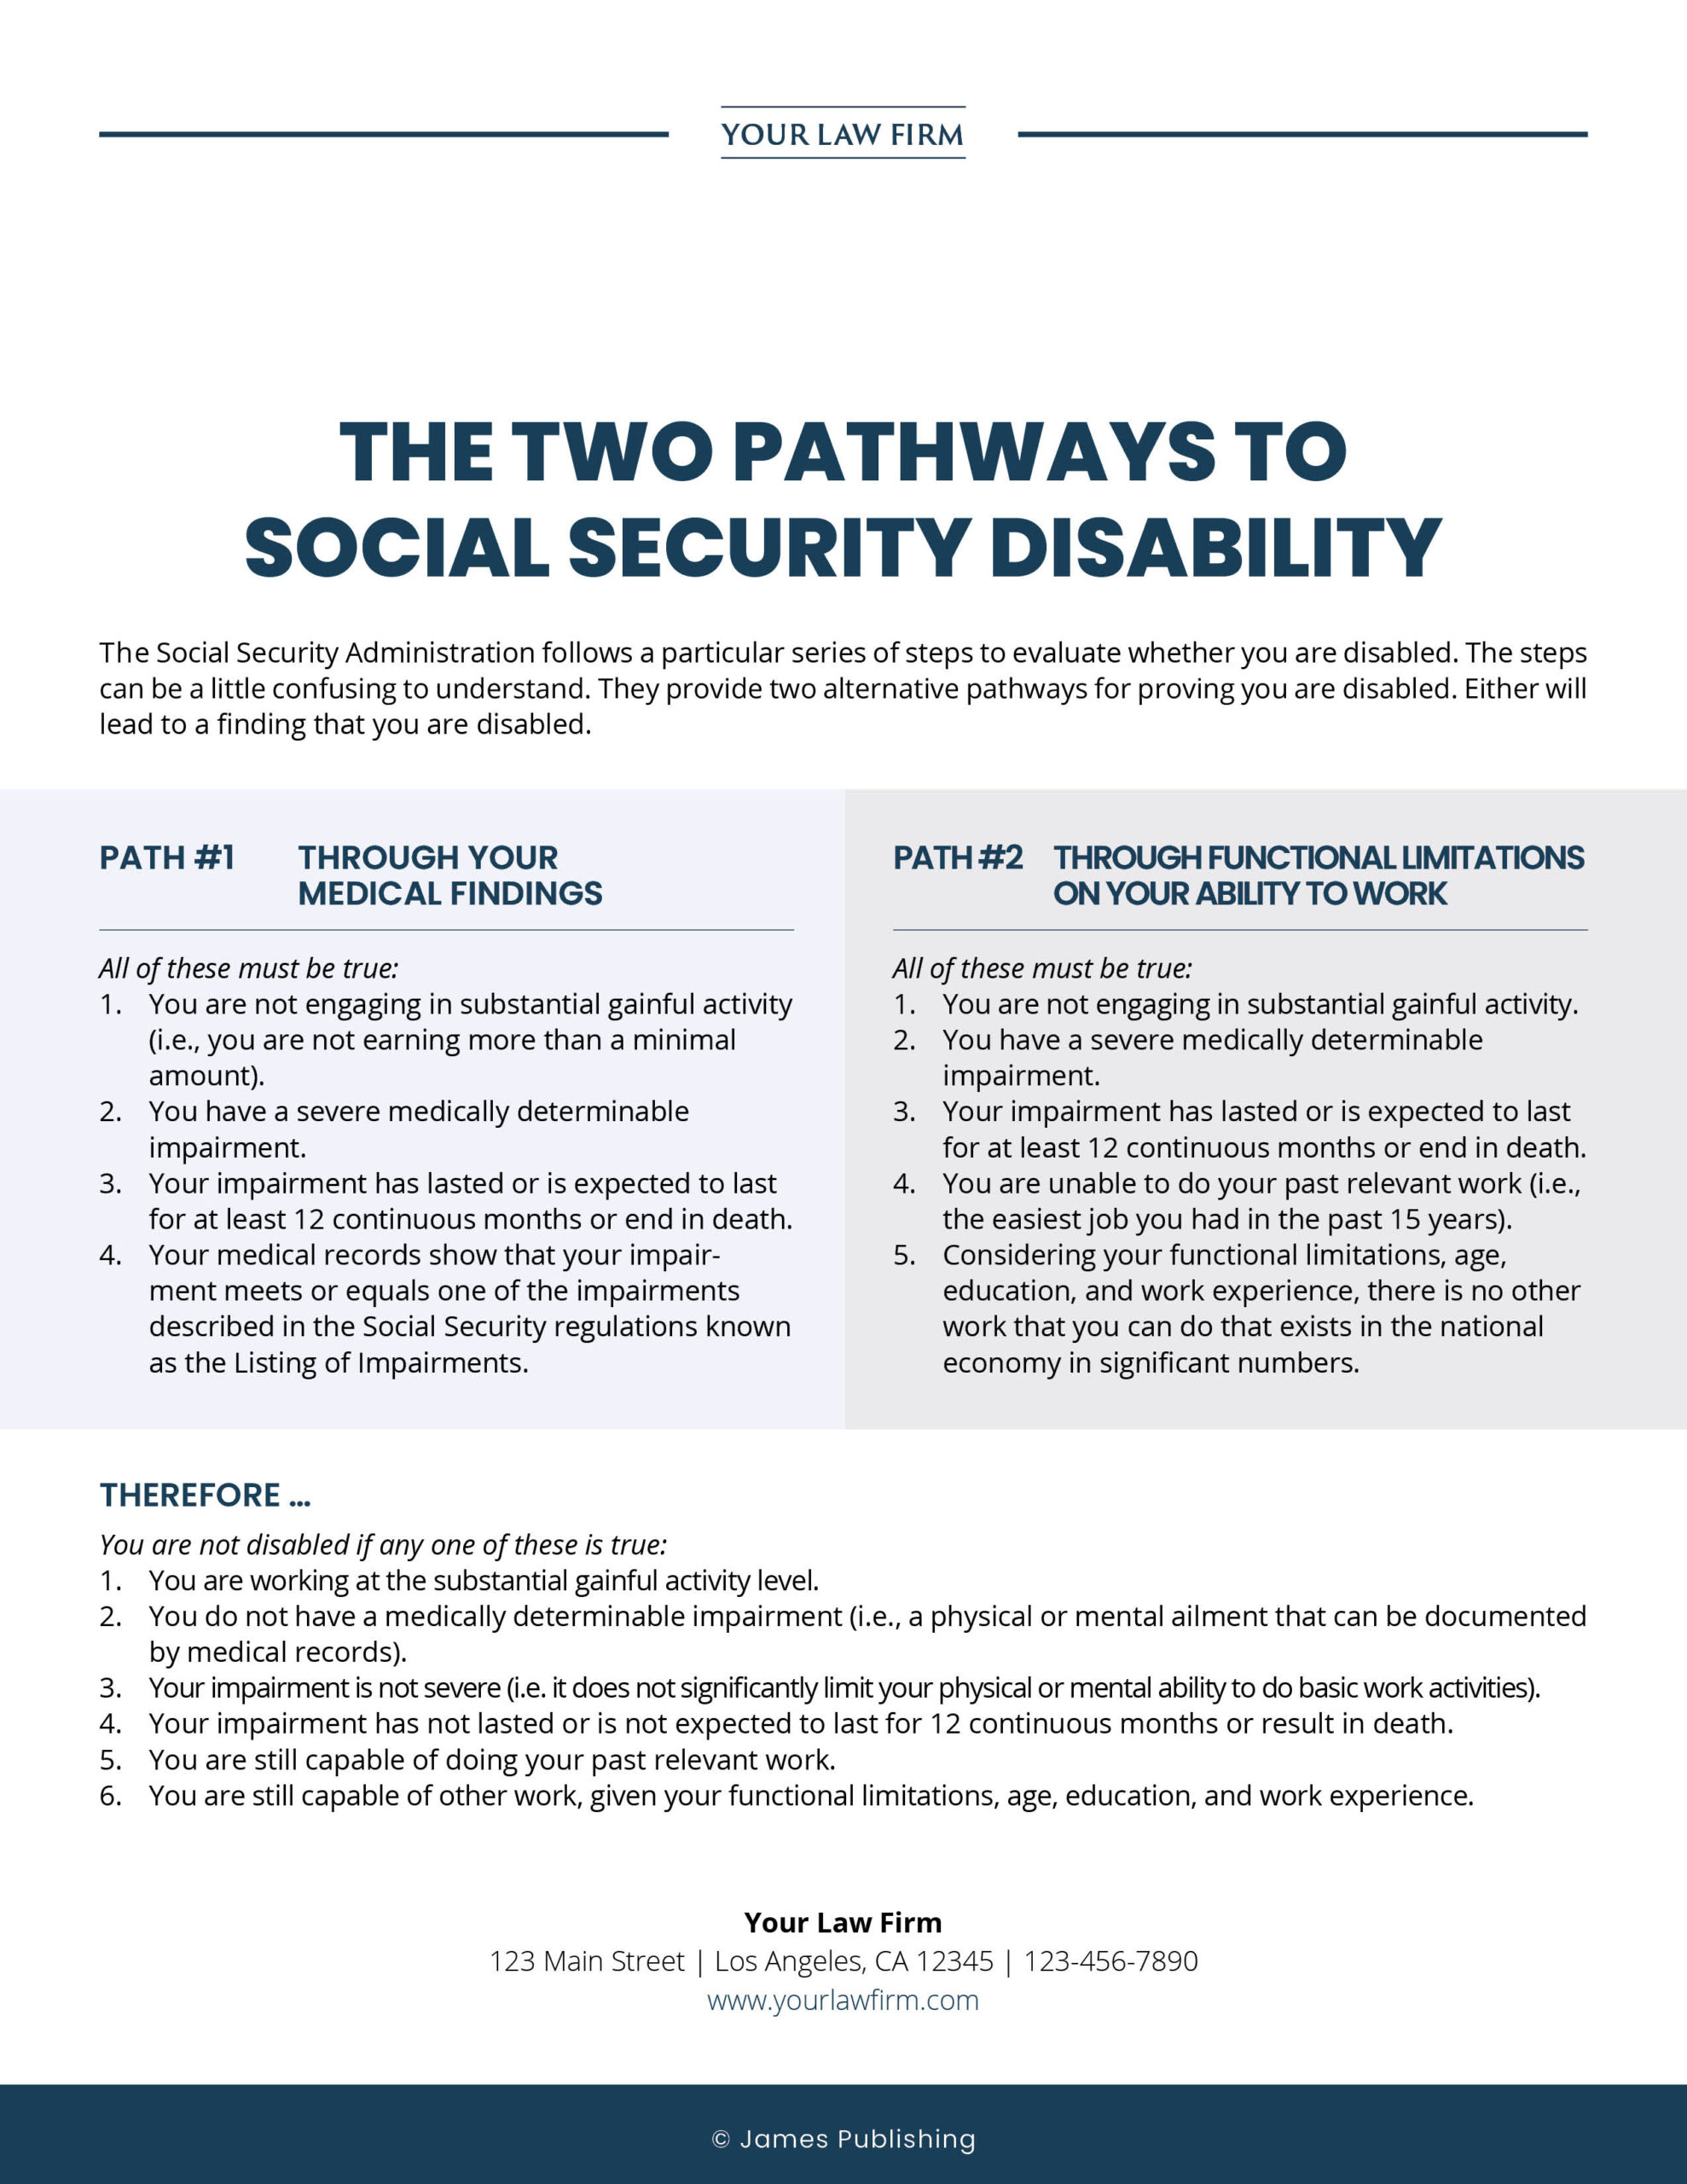 SSD-17 The Two Pathways to Social Security Disability